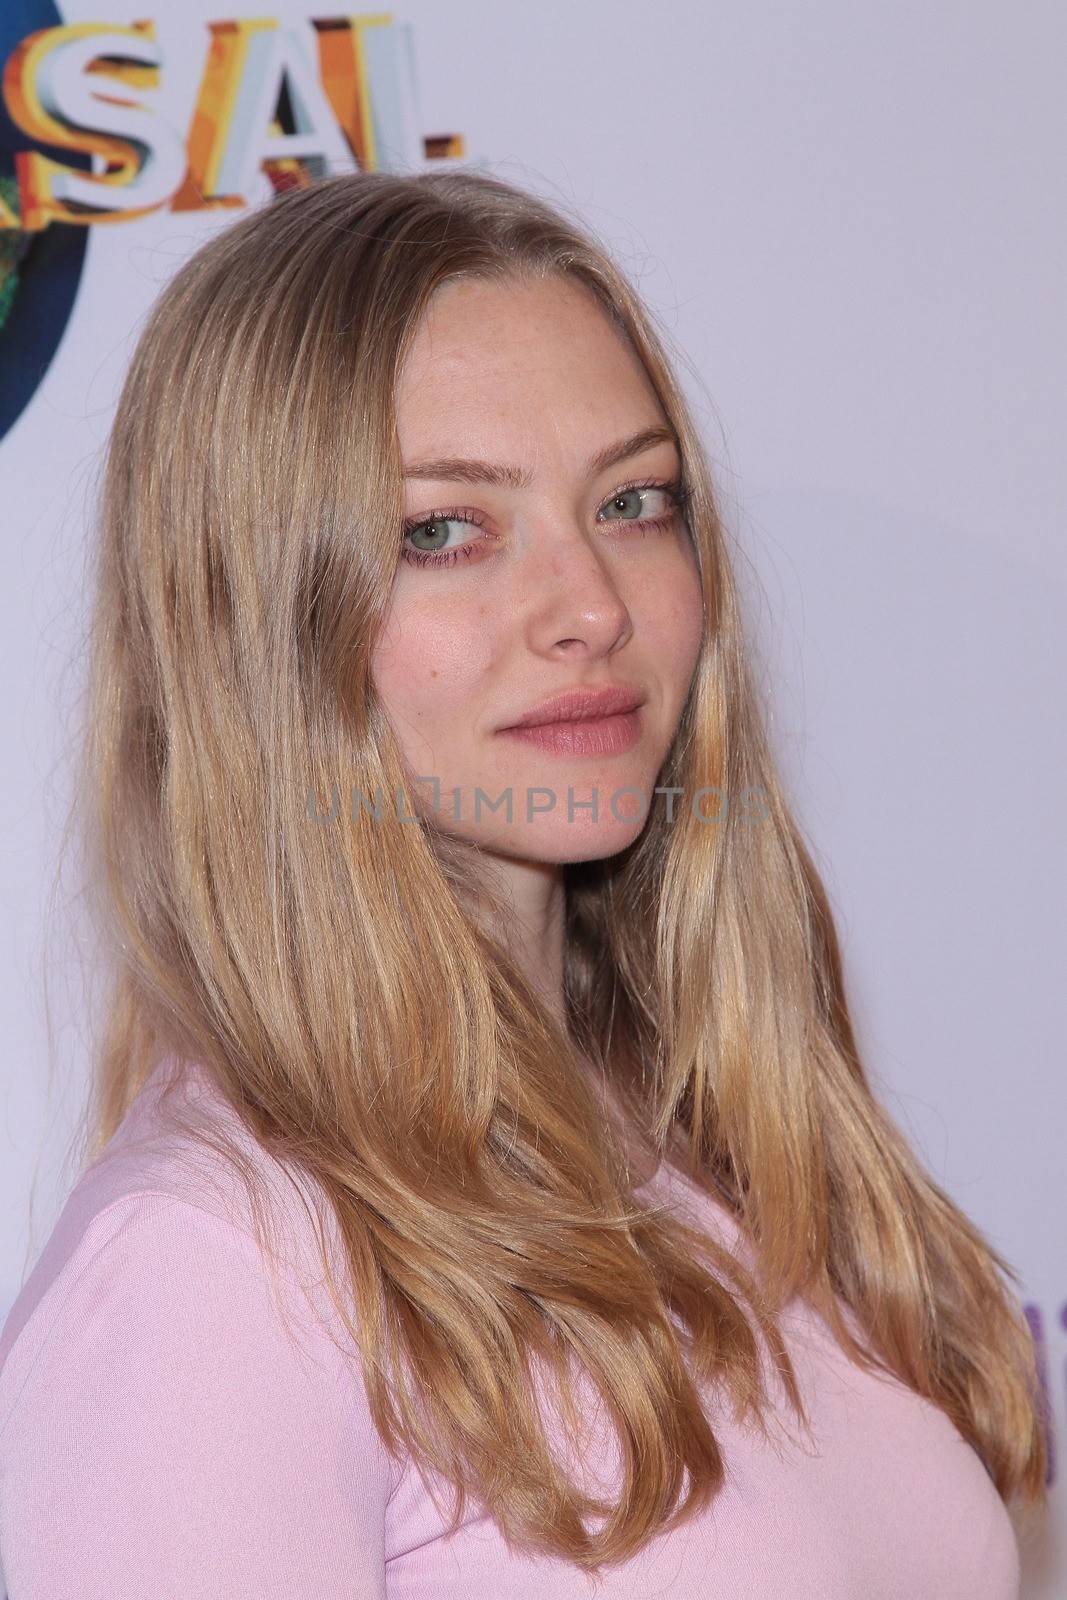 Amanda Seyfried at the March Of Dimes' 6th Annual Celebration Of Babies Luncheon, Beverly Hills Hotel, Beverly Hills, CA 12-02-11/ImageCollect by ImageCollect